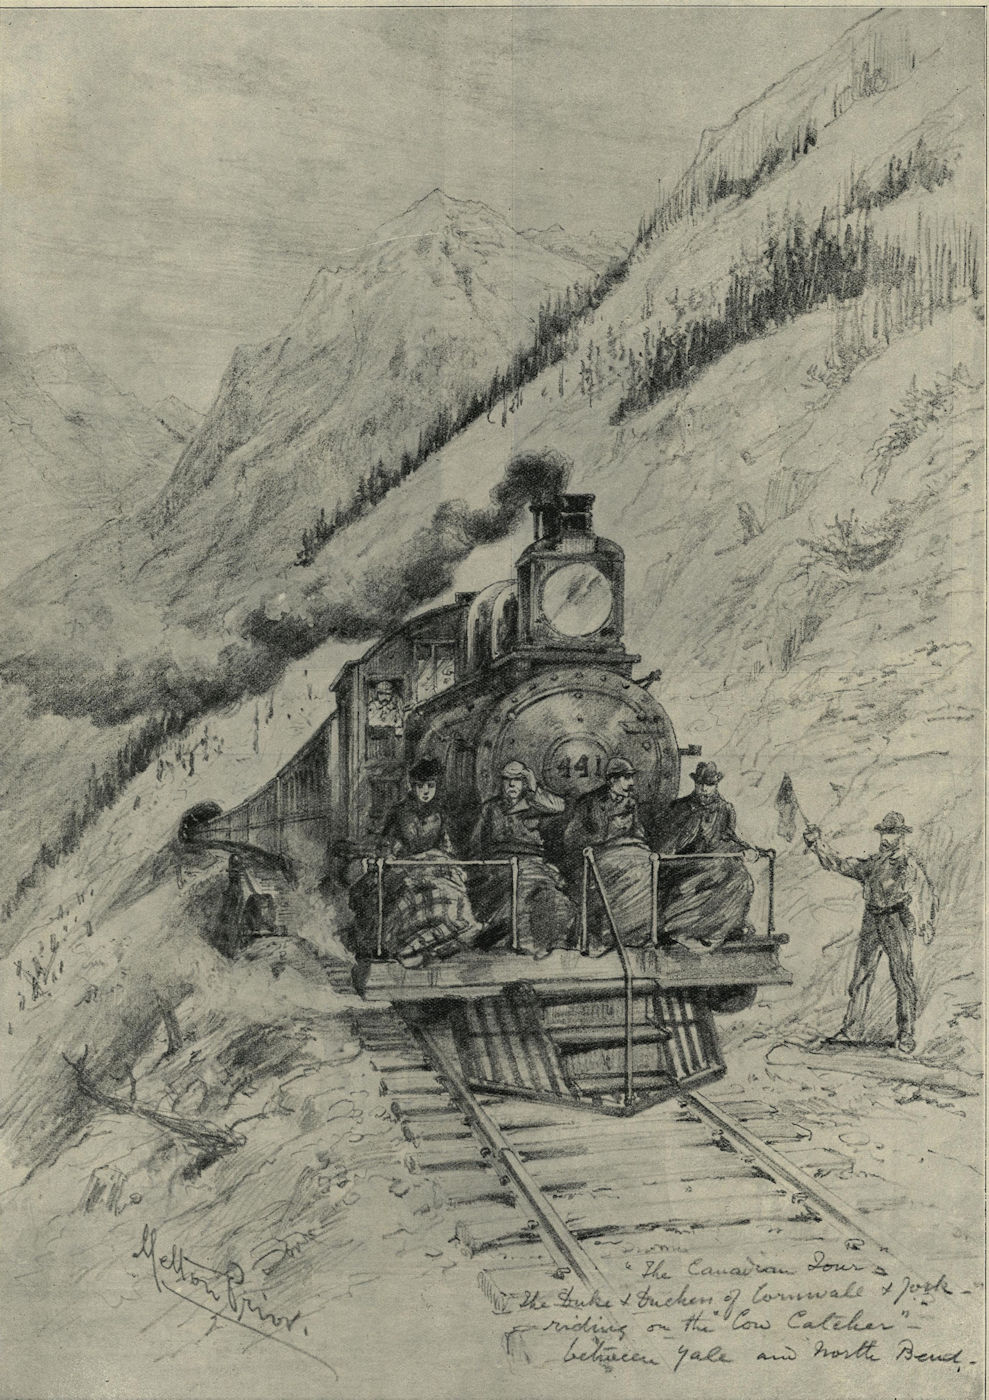 Canadian Pacific Railway: The Duke riding a cow-catcher. Yale to North Bend 1901